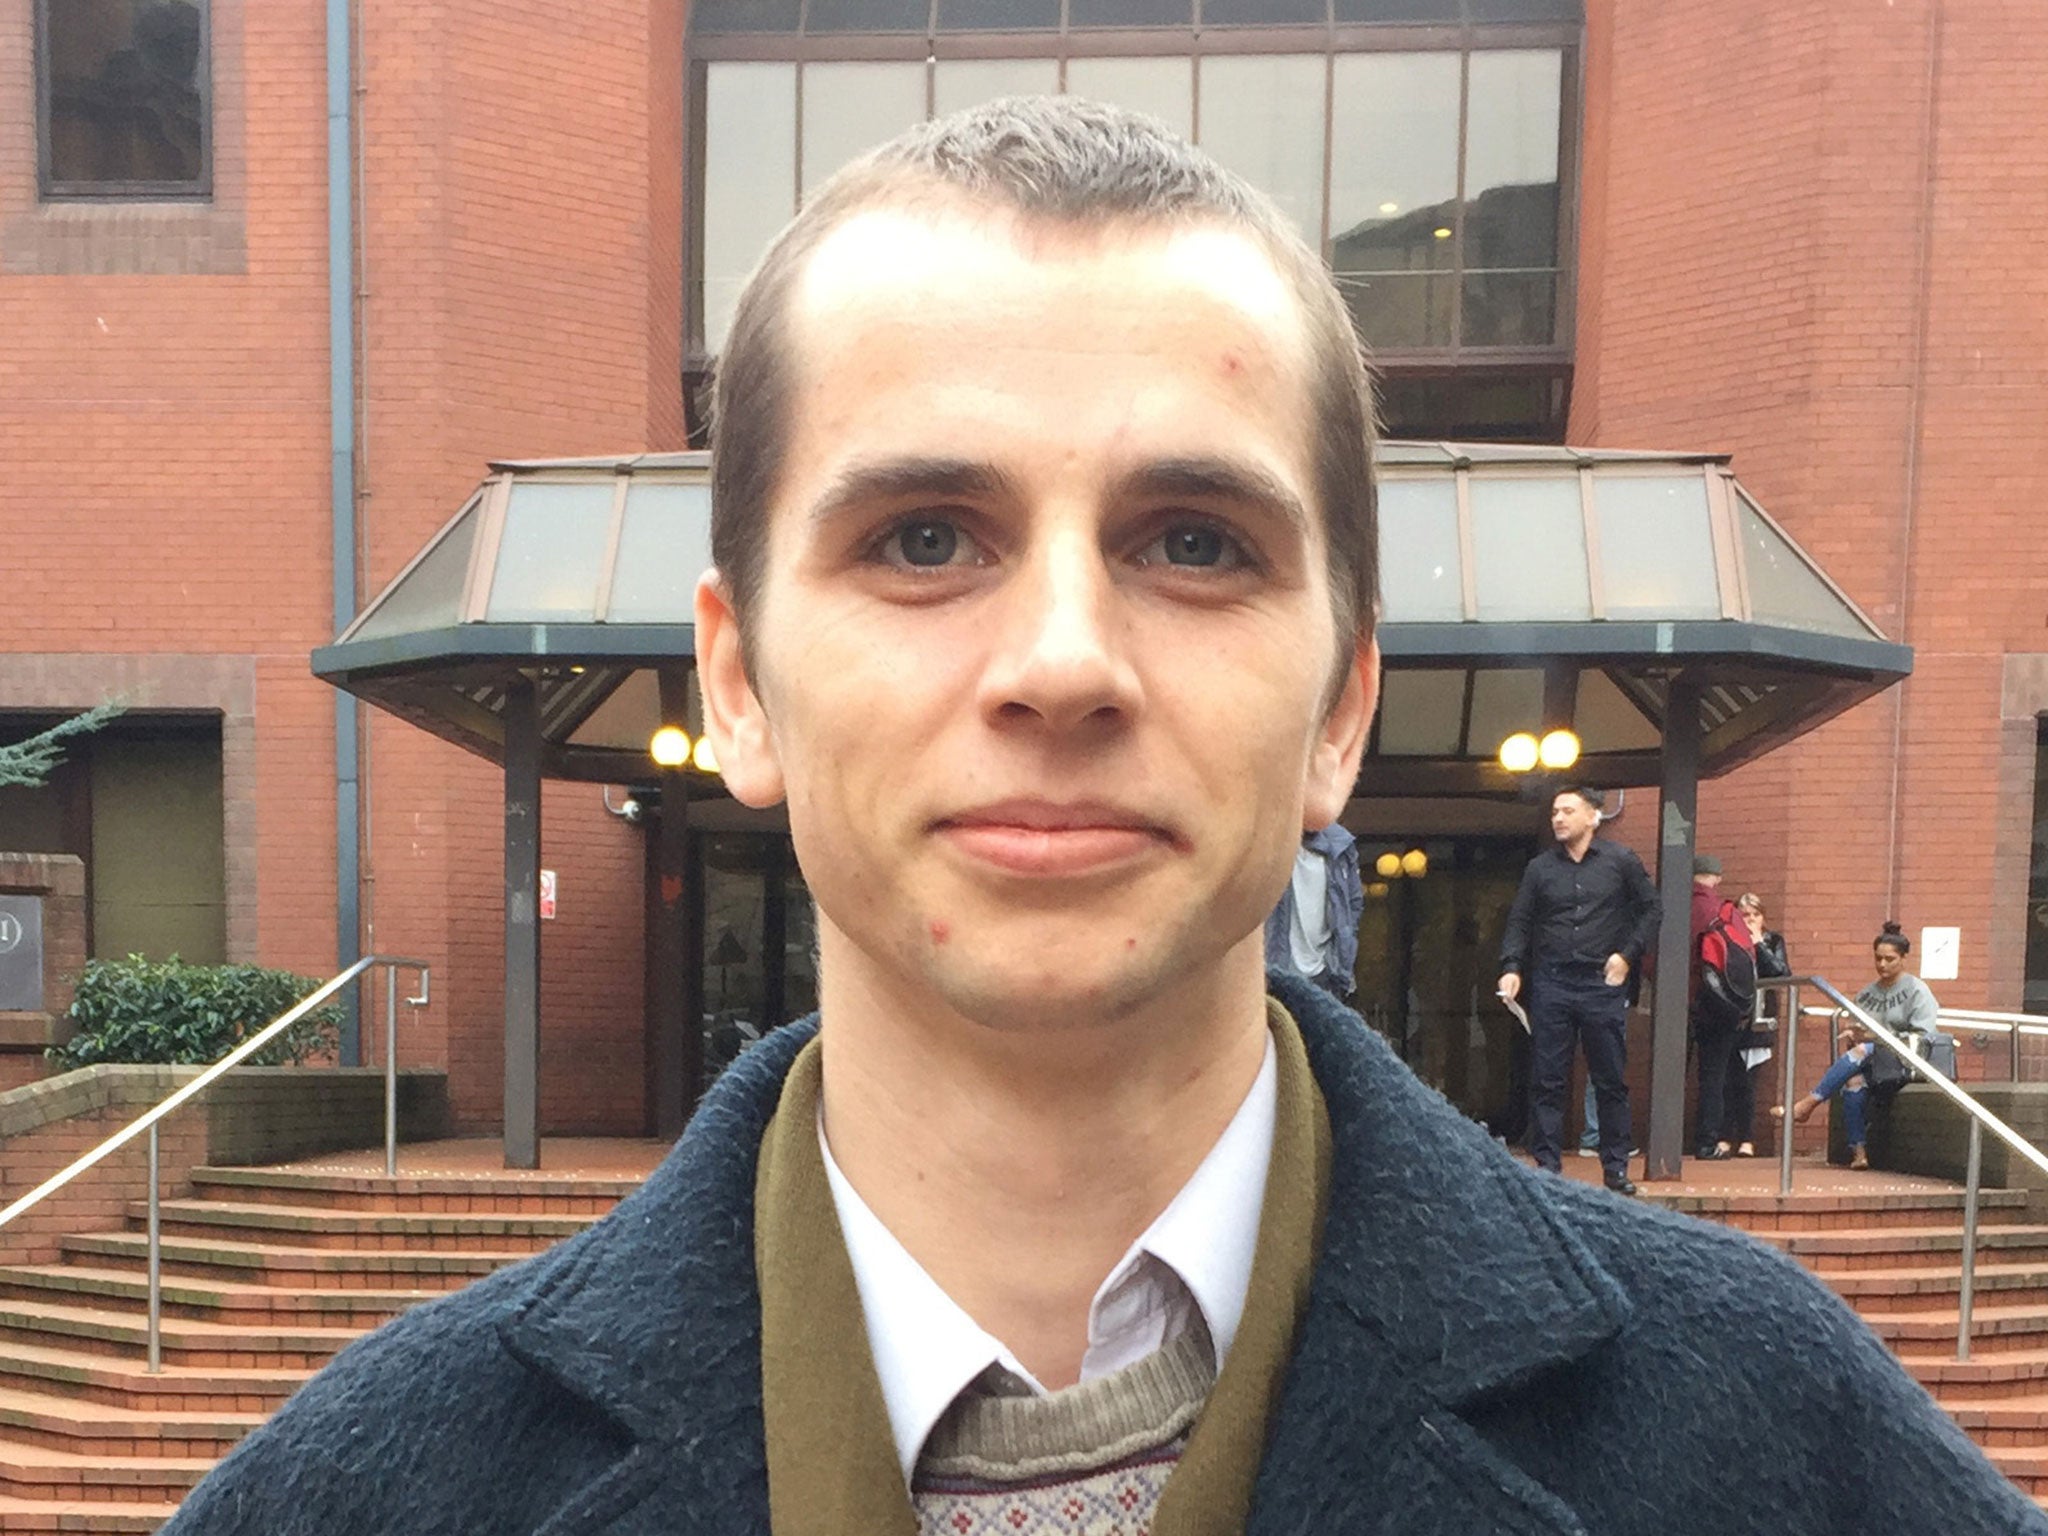 University student Joshua Walker was cleared at Birmingham Crown Court of a terrorism offence